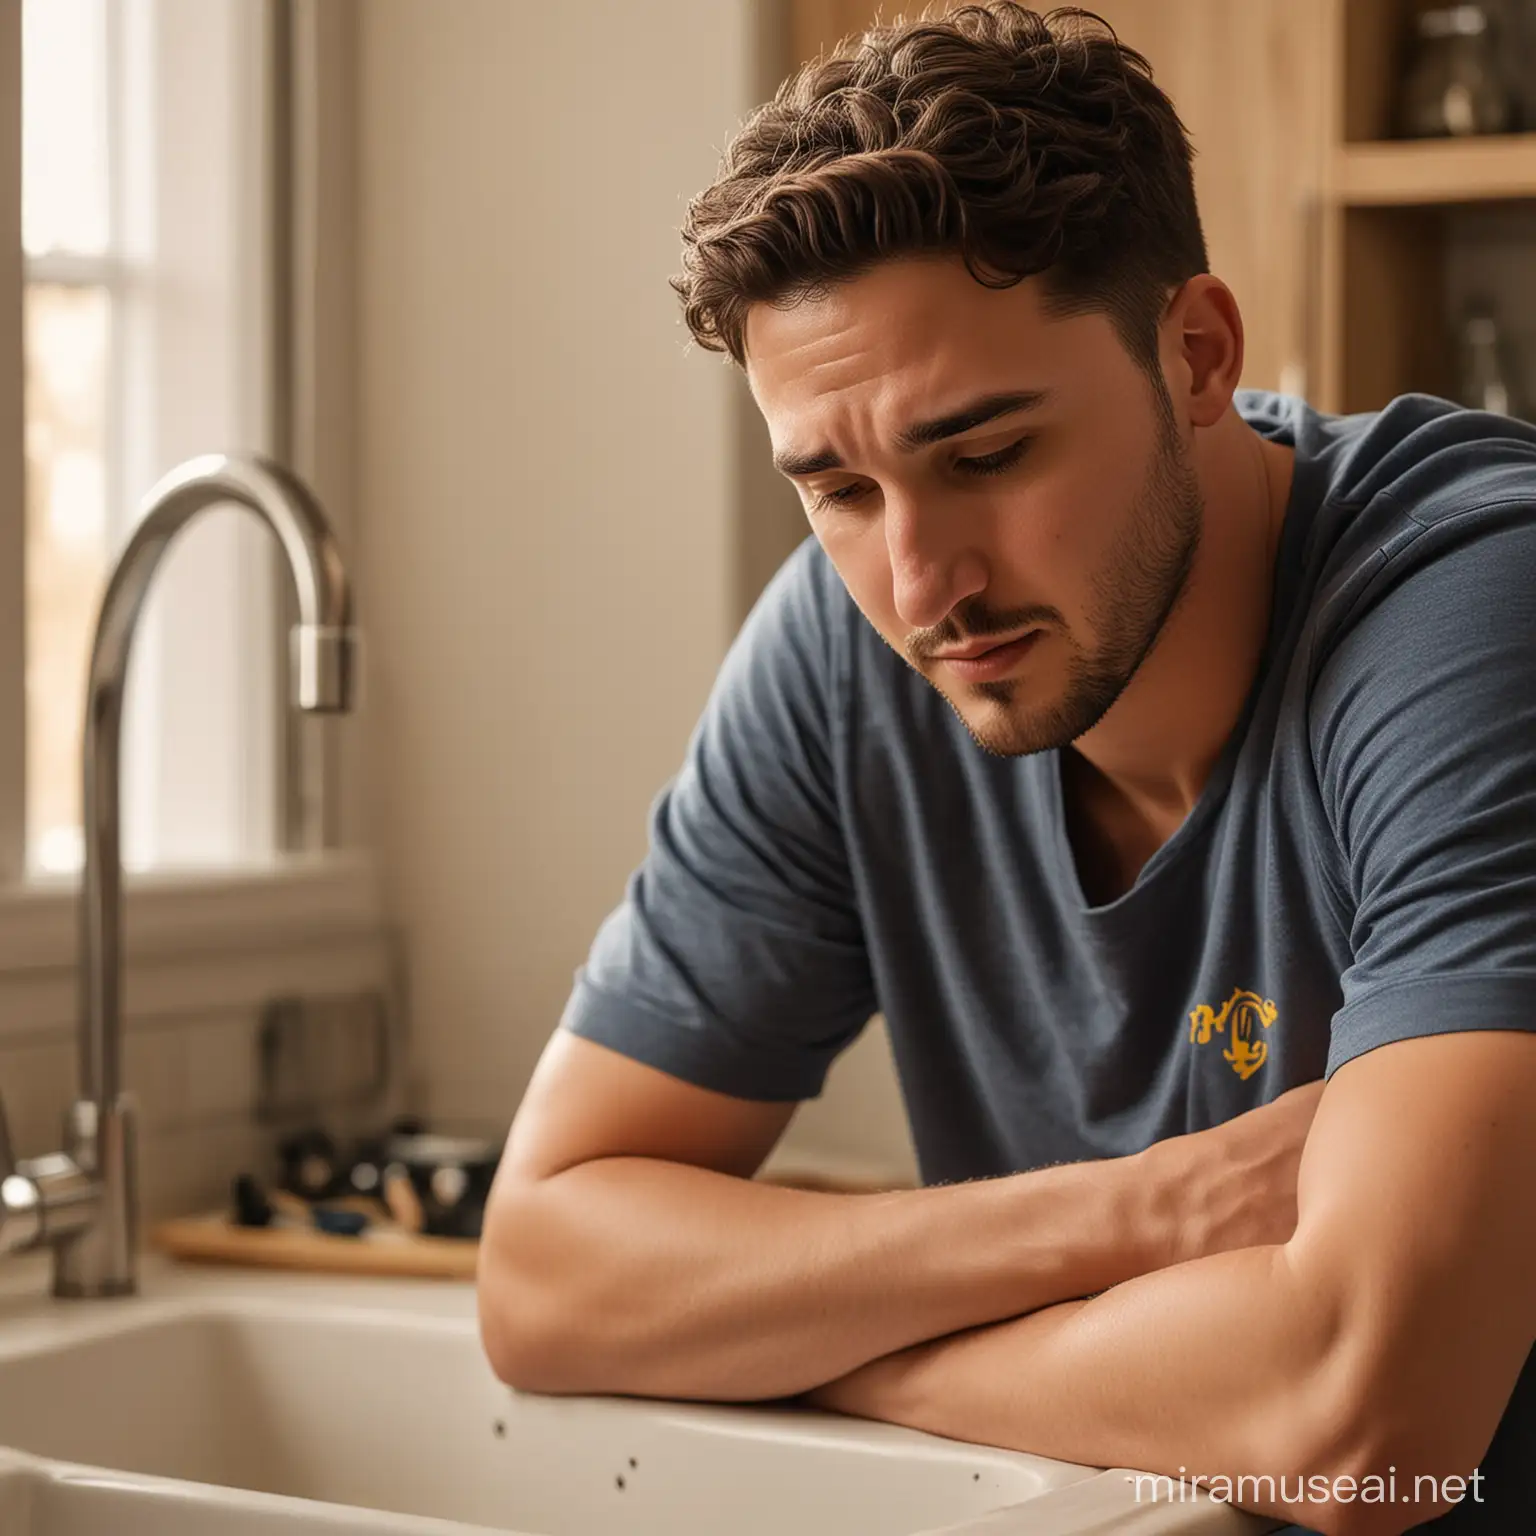 Sad Klay Thompson Washing Dishes with Depth of Field Effect